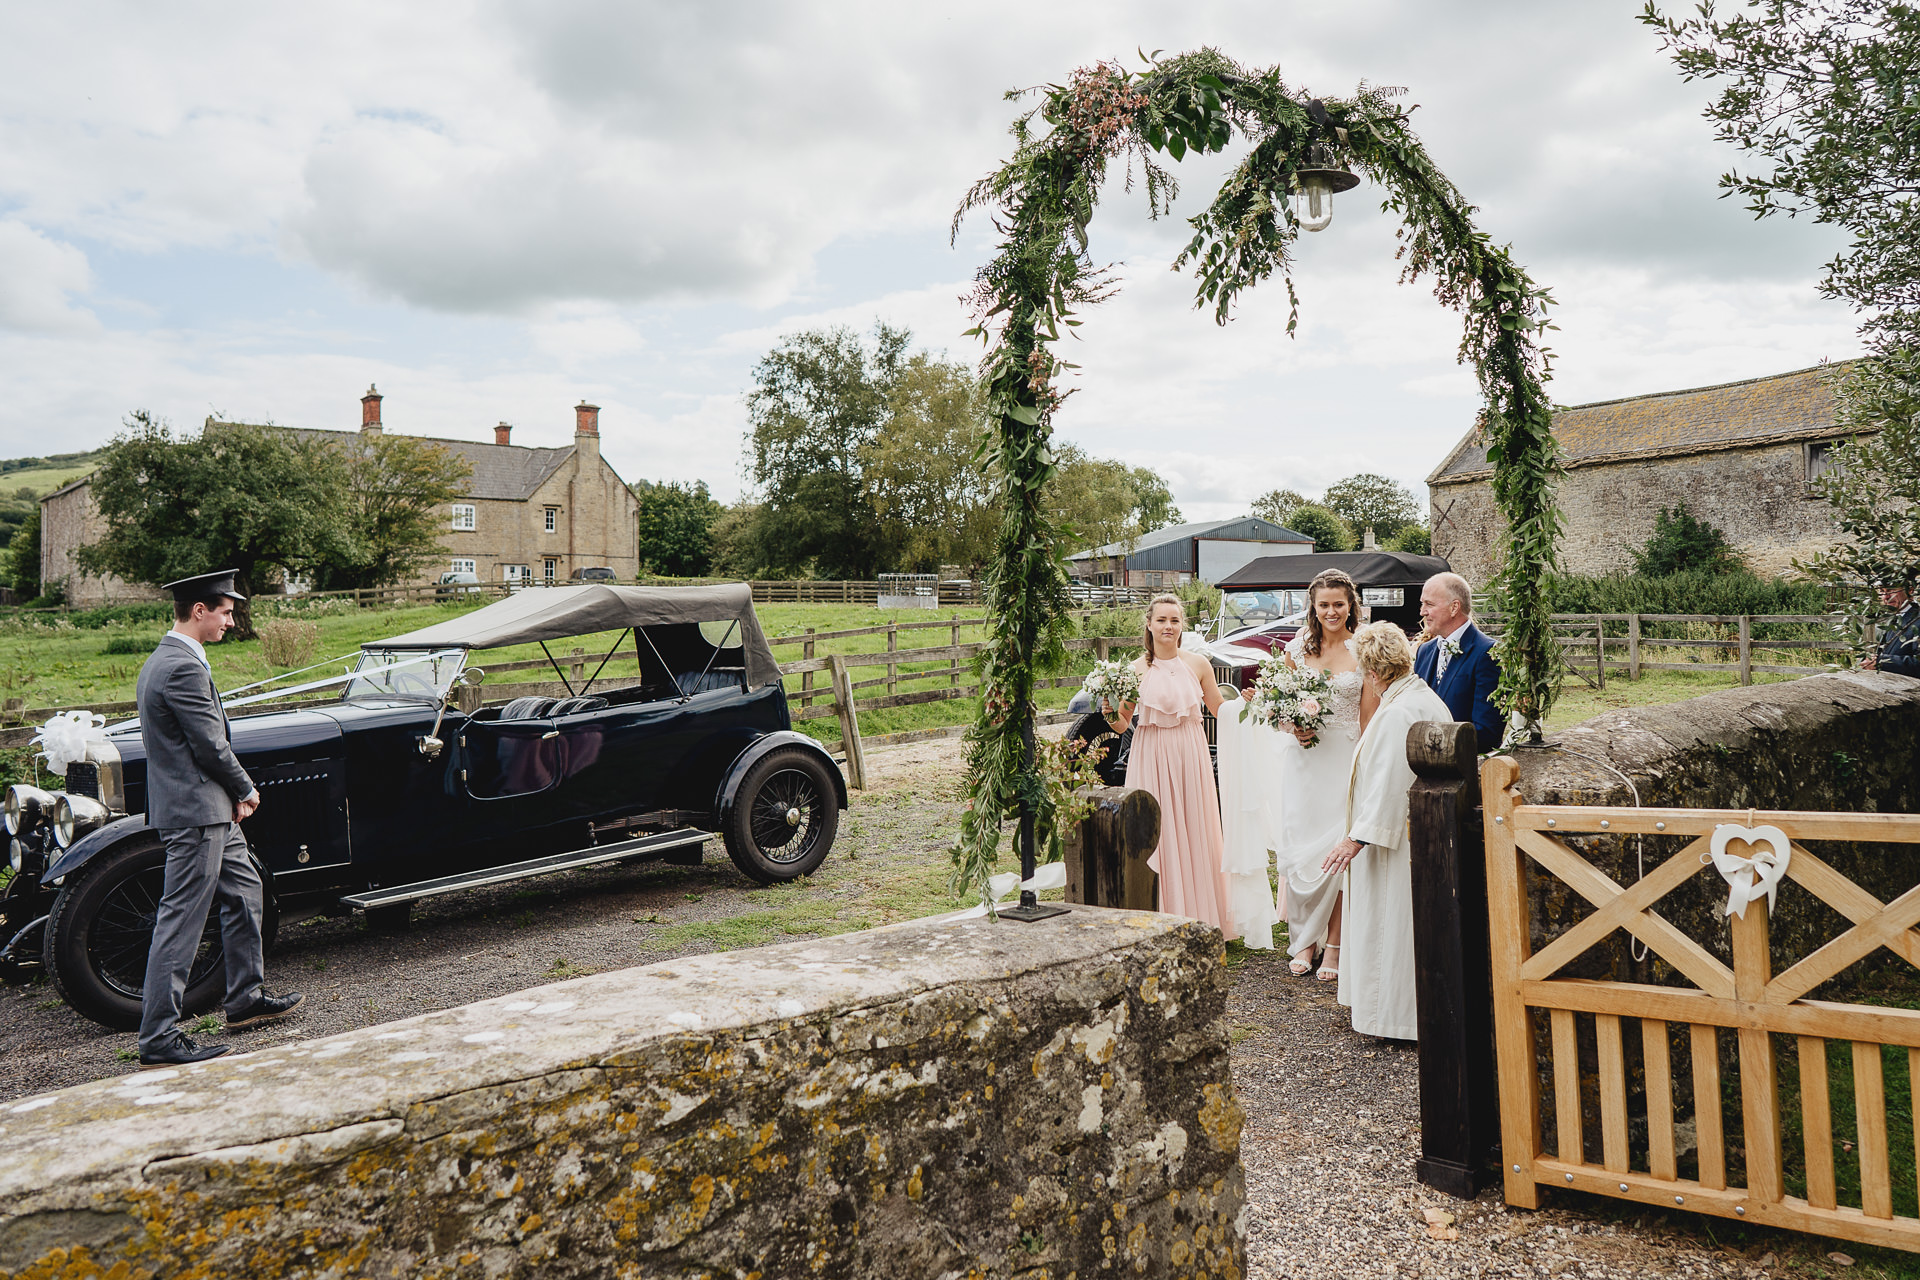 Bride and bridesmaids arriving outside a rural church